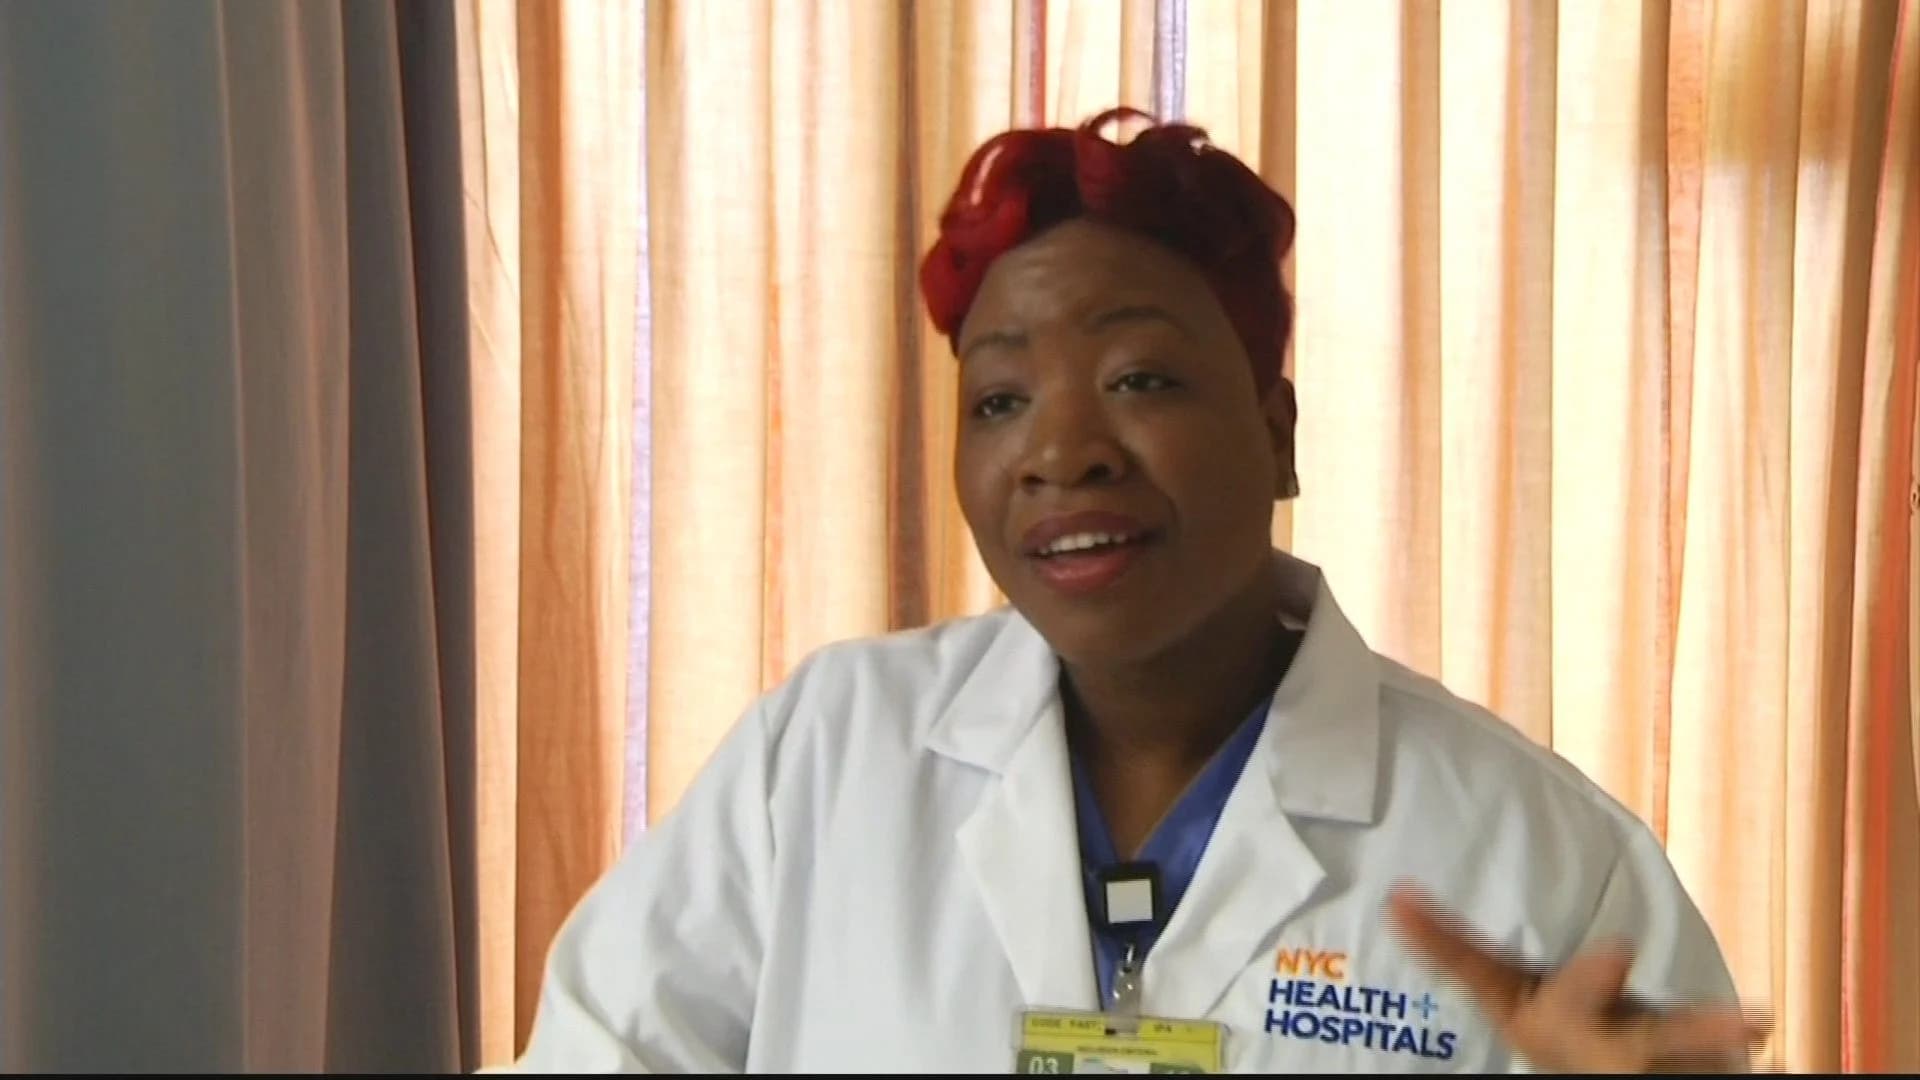 Brooklyn native inspires with her path to become a doctor